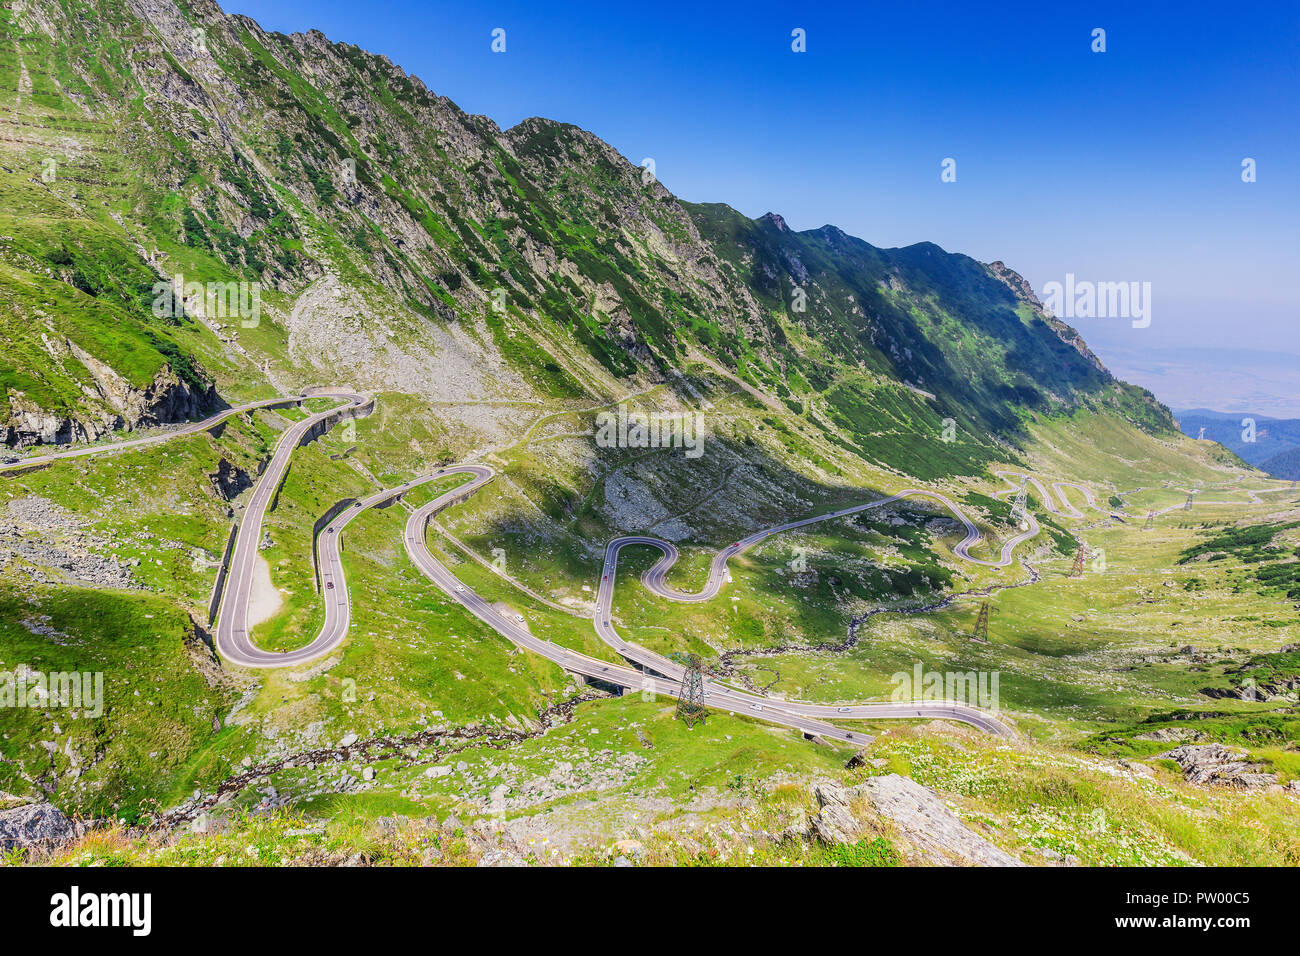 Transfagarasan pass is crossing Carpathian mountains in Romania. One of the most spectacular mountain roads in the world. Stock Photo